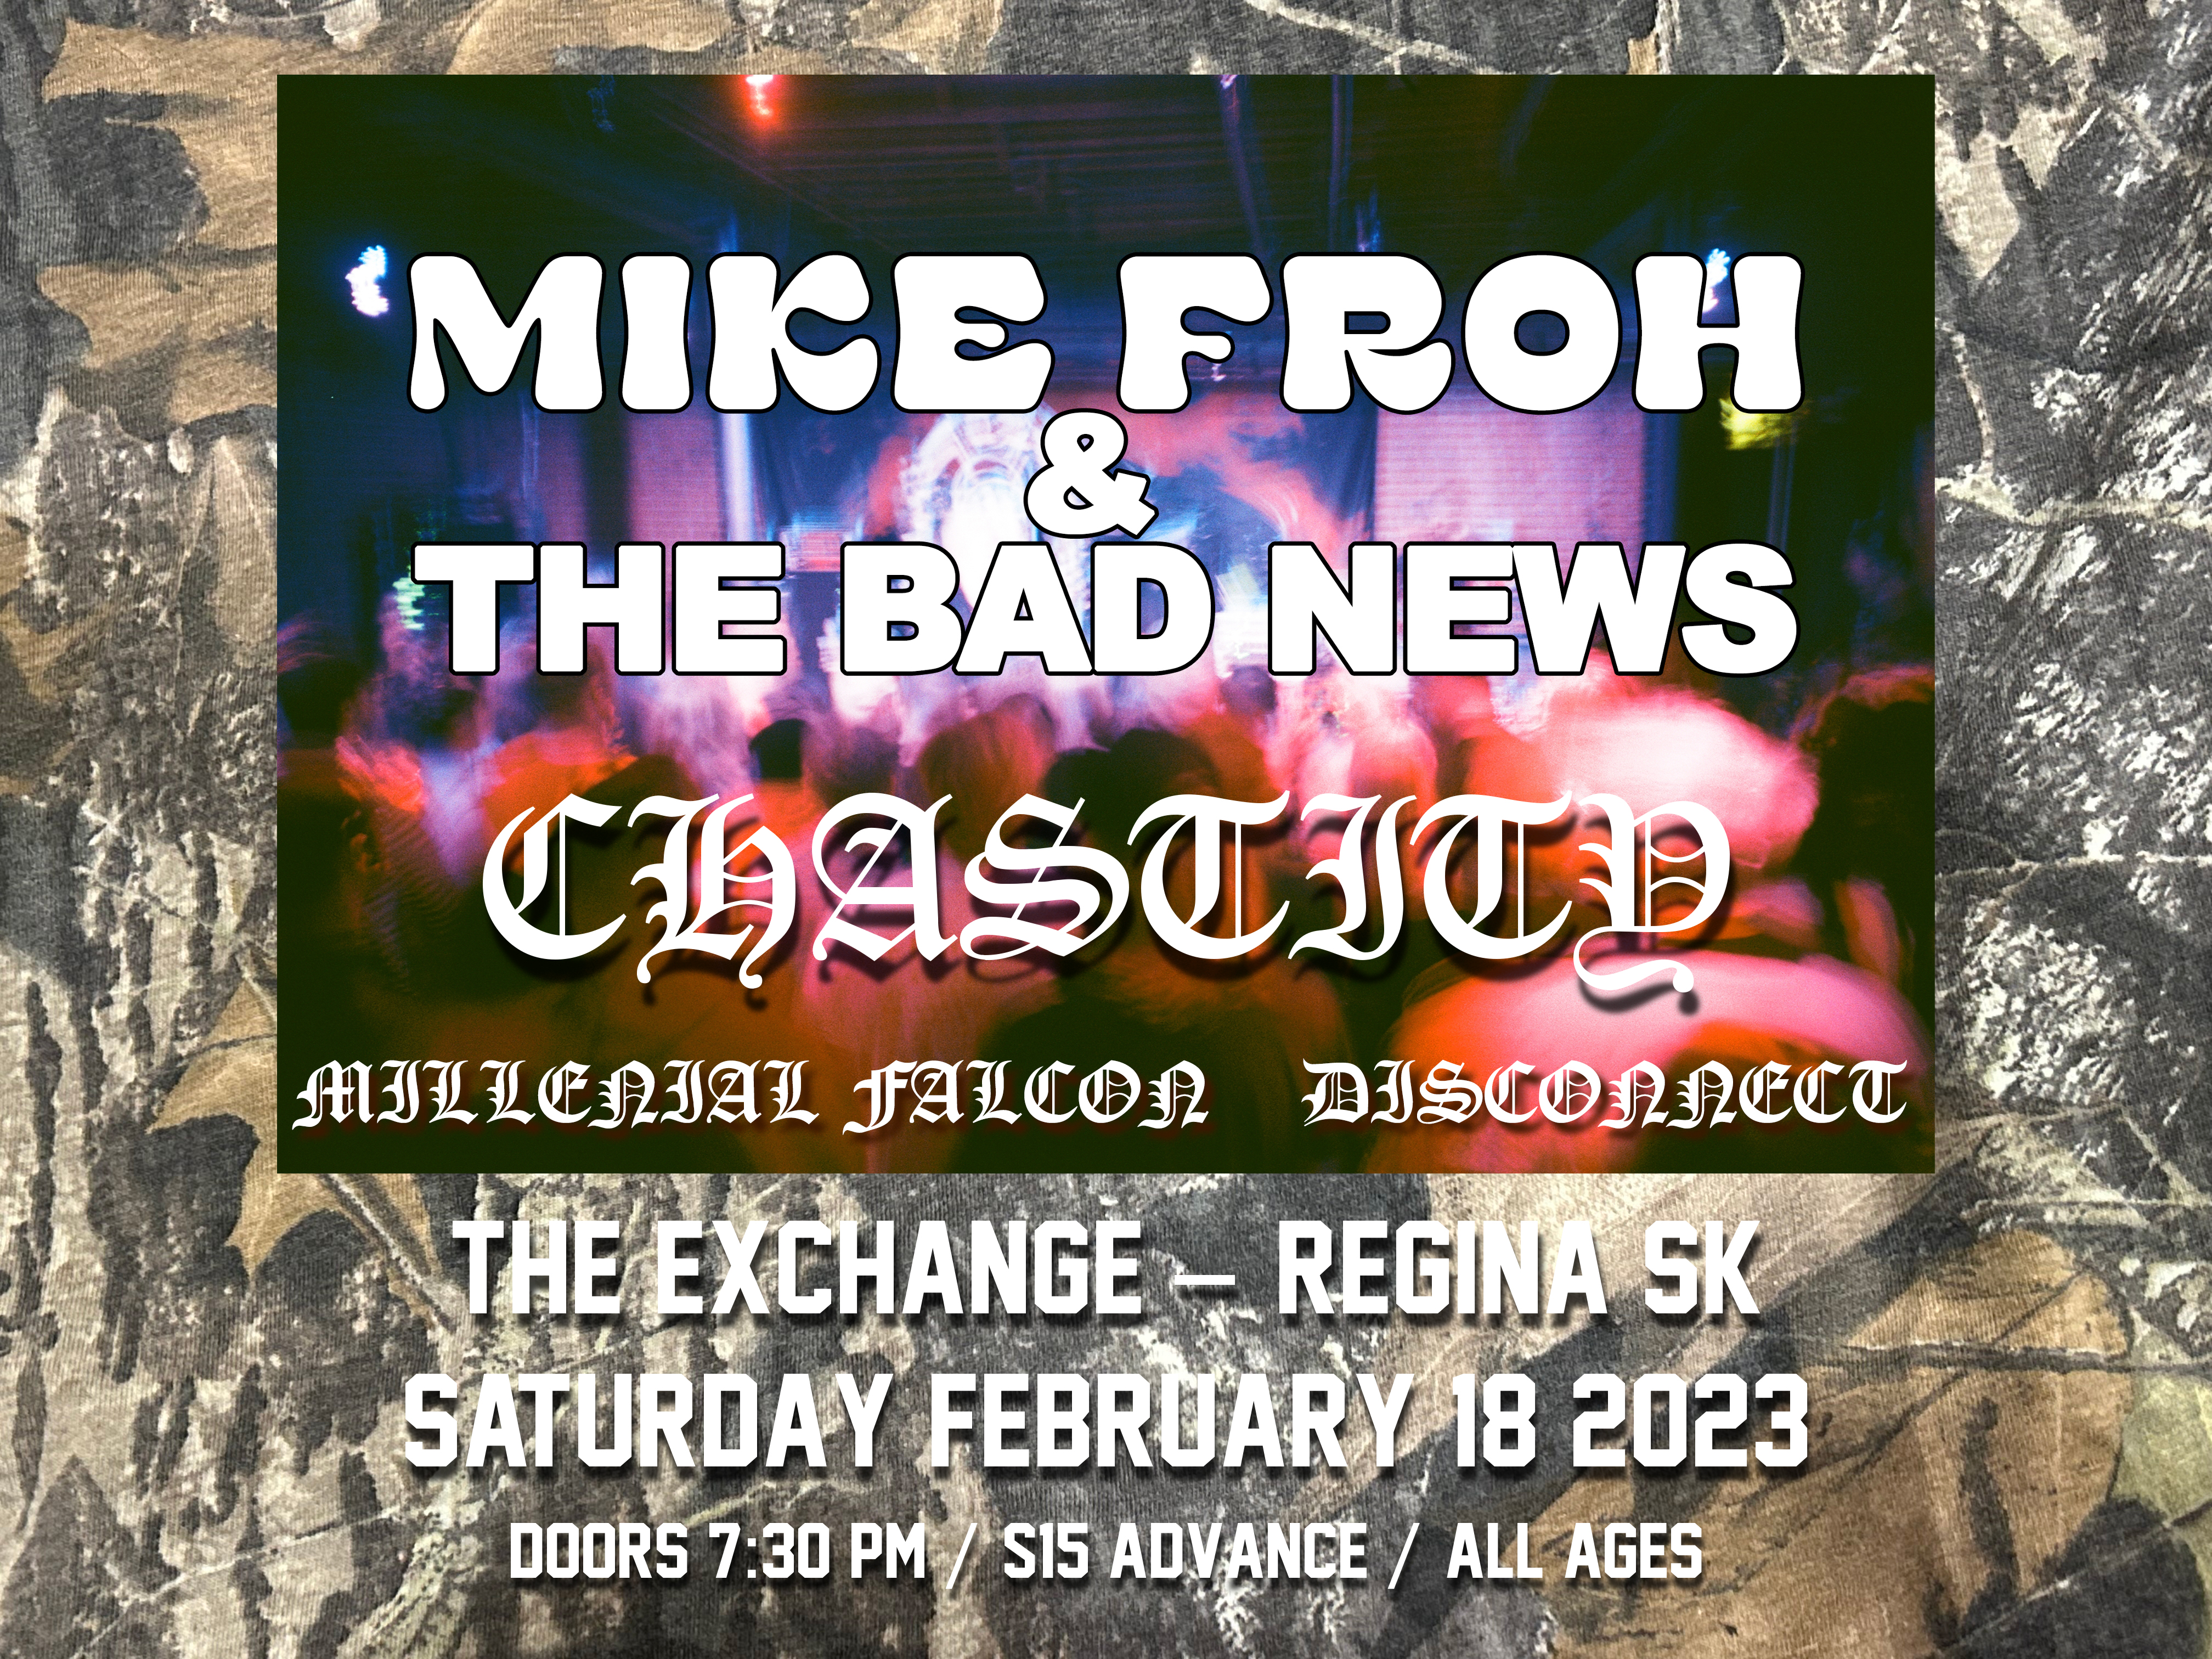 Mike Froh & The Bad News w/ Chastity, Millennial Falcon, The Disconnect 